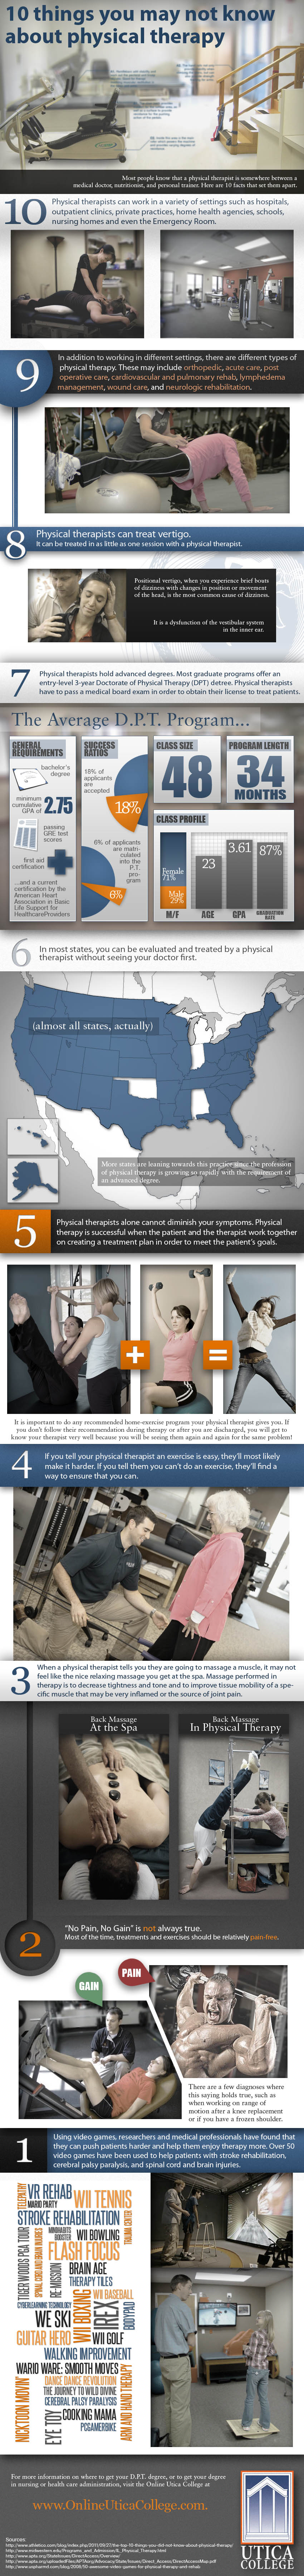 10 Things You Might Not Know About Physical Therapy